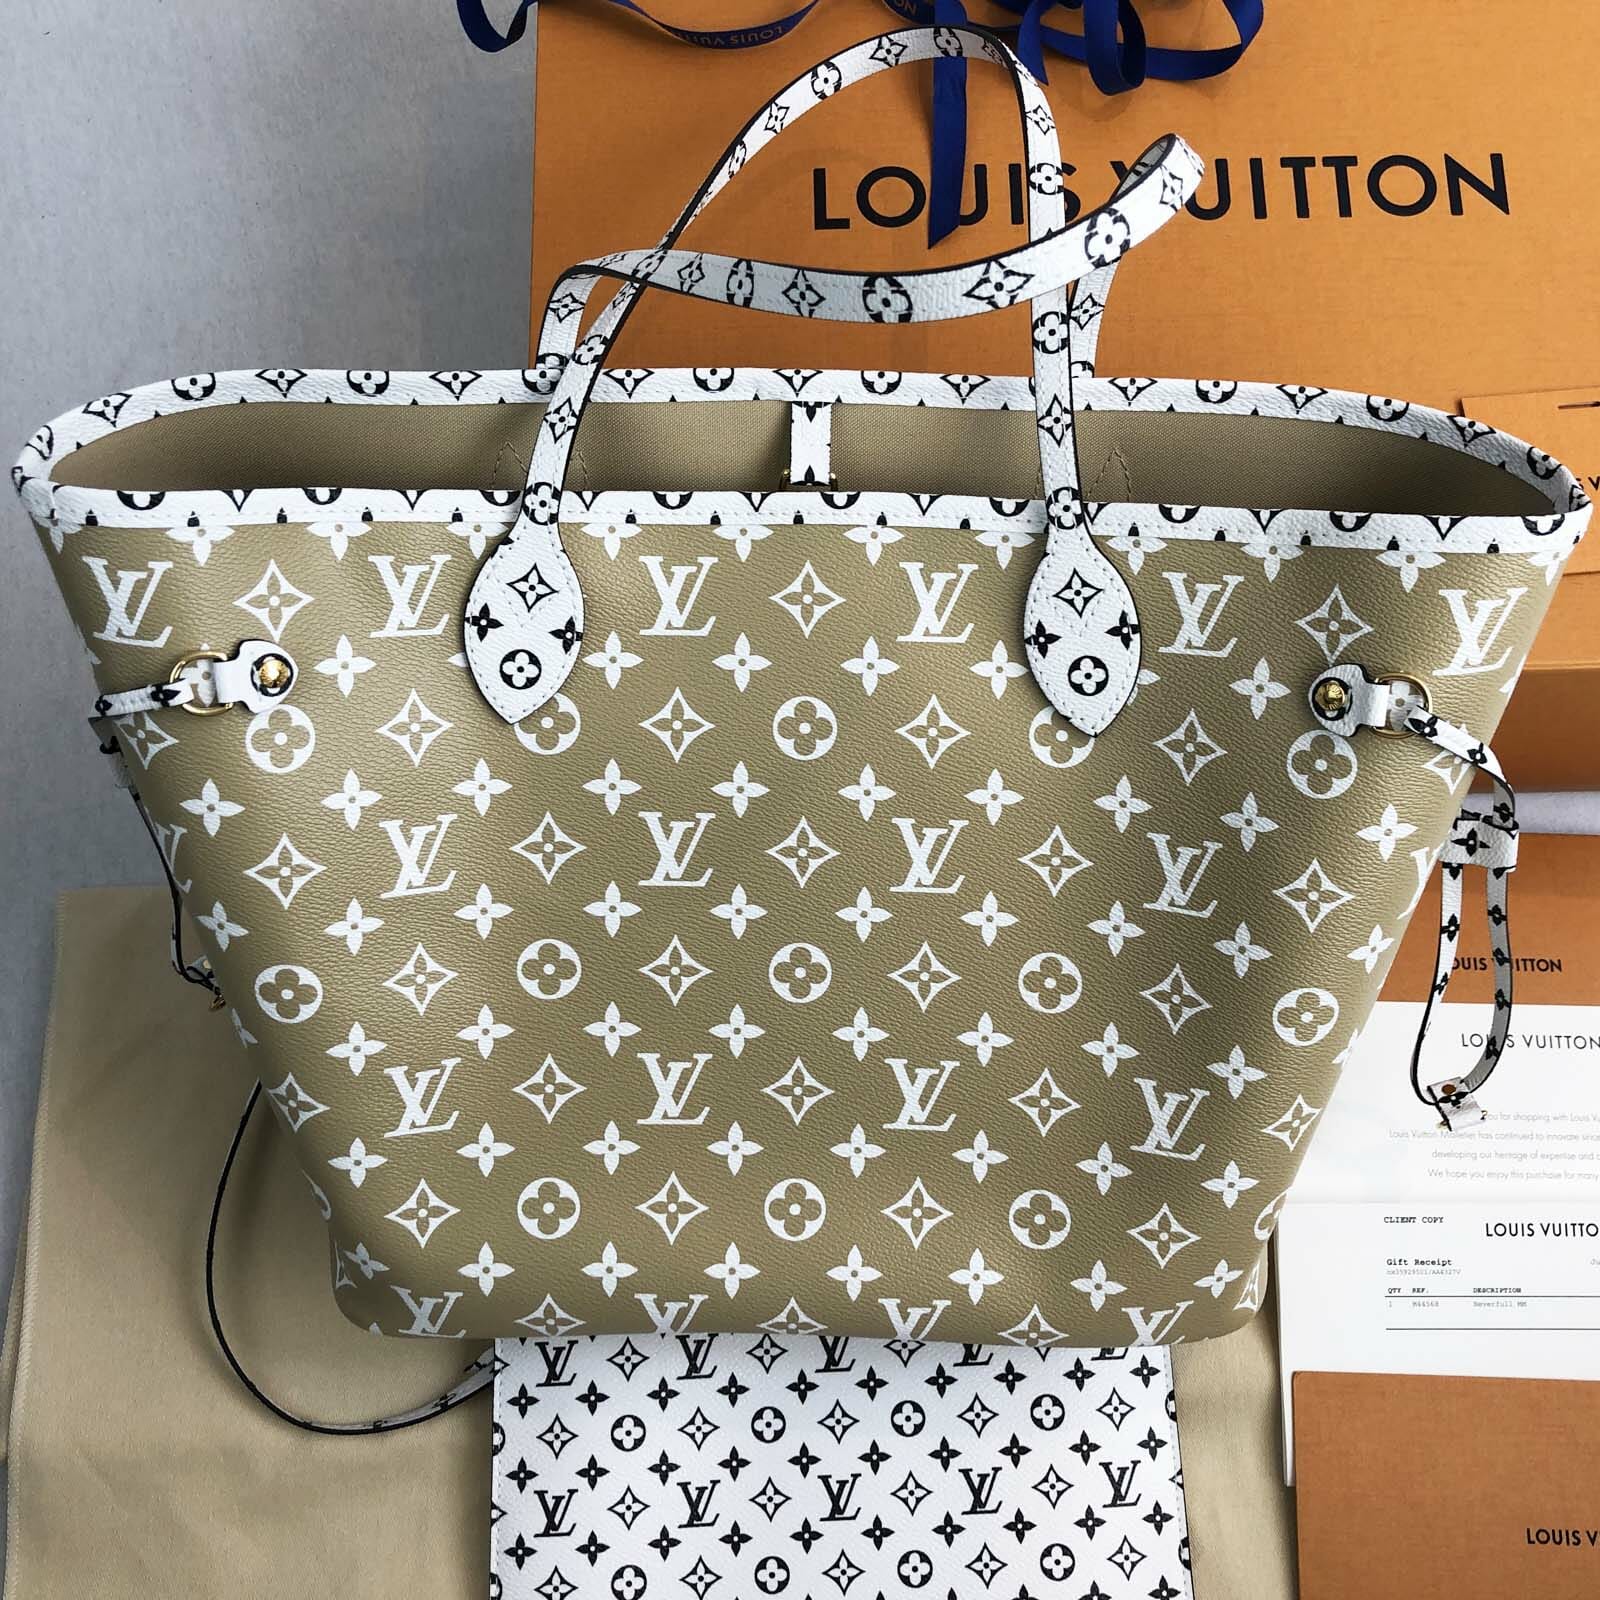 Louis Vuitton Neverfull Bag Ebay Uk | Supreme and Everybody